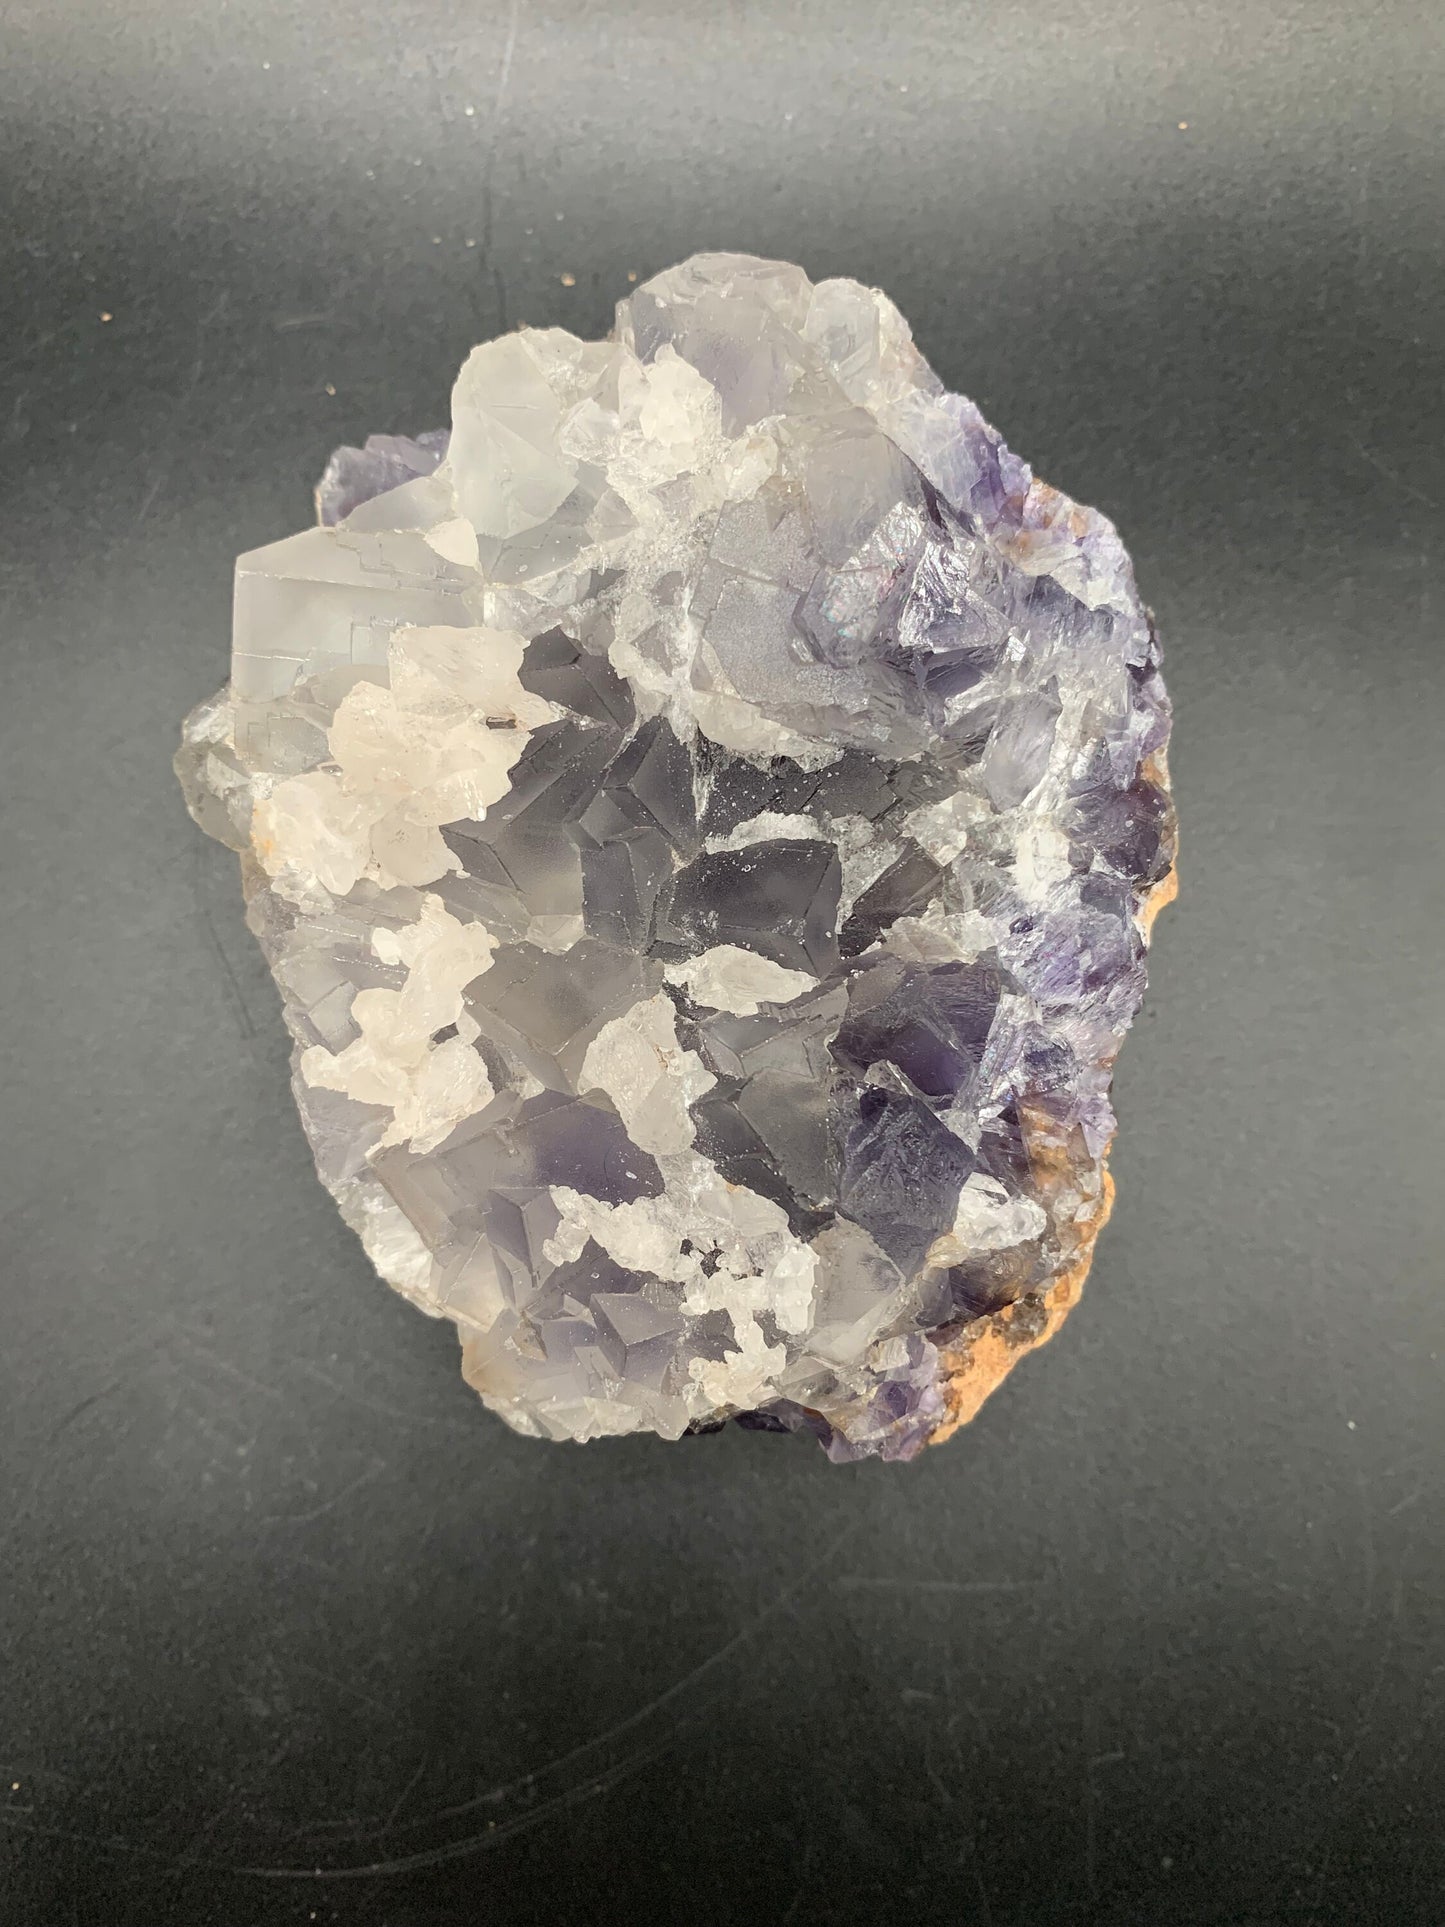 Gorgeous Fluorite with Calcite